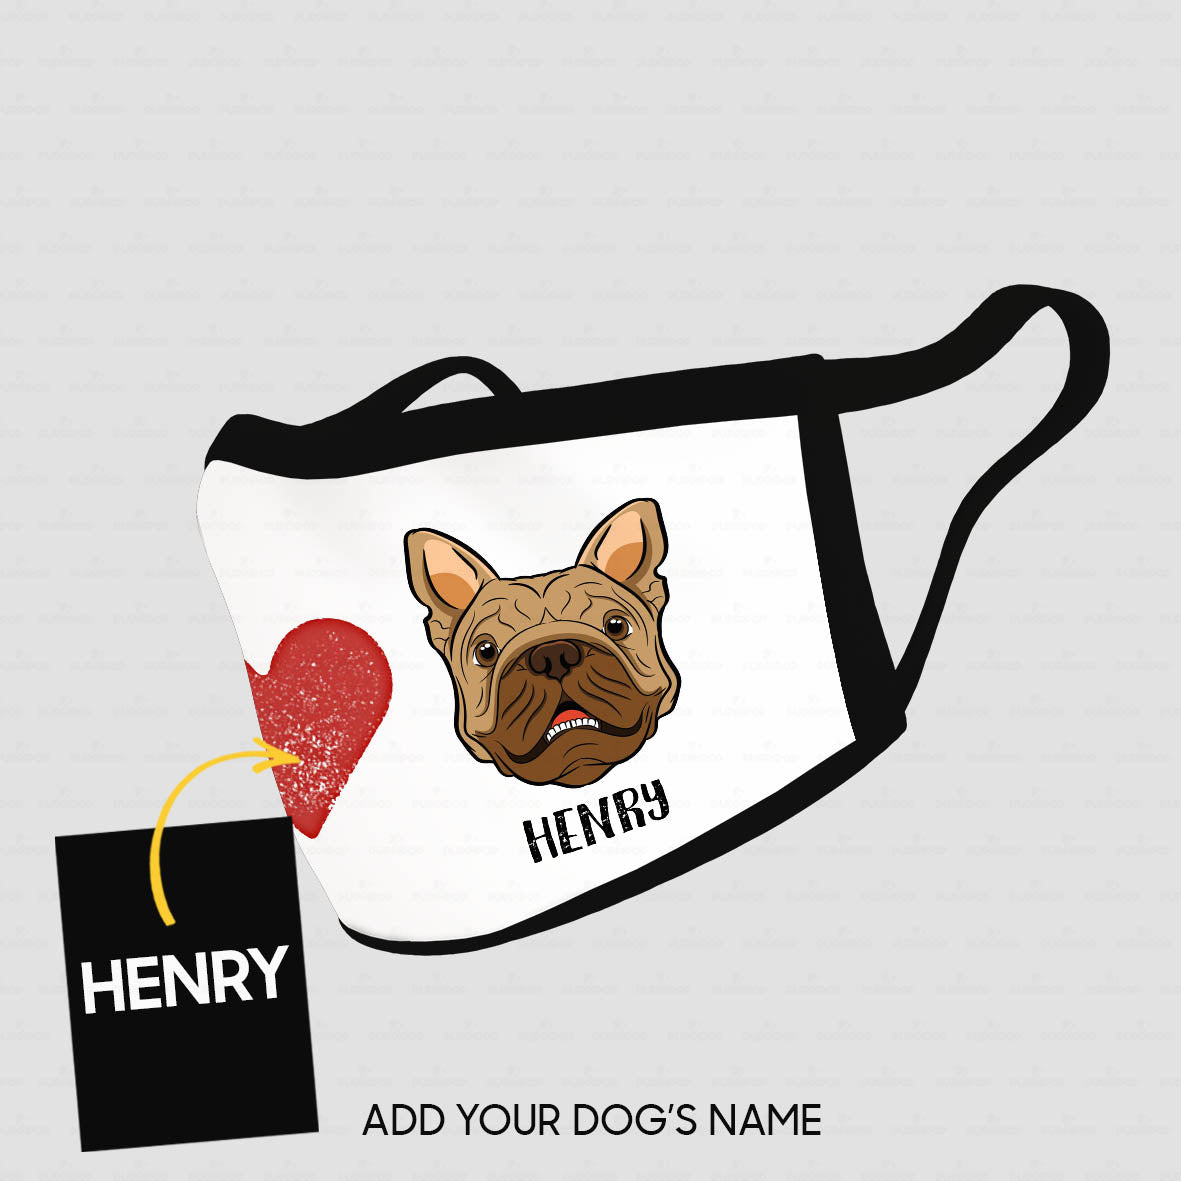 Personalized Dog Gift Idea - I Love Bull Dog For Dog Lovers - Cloth Mask